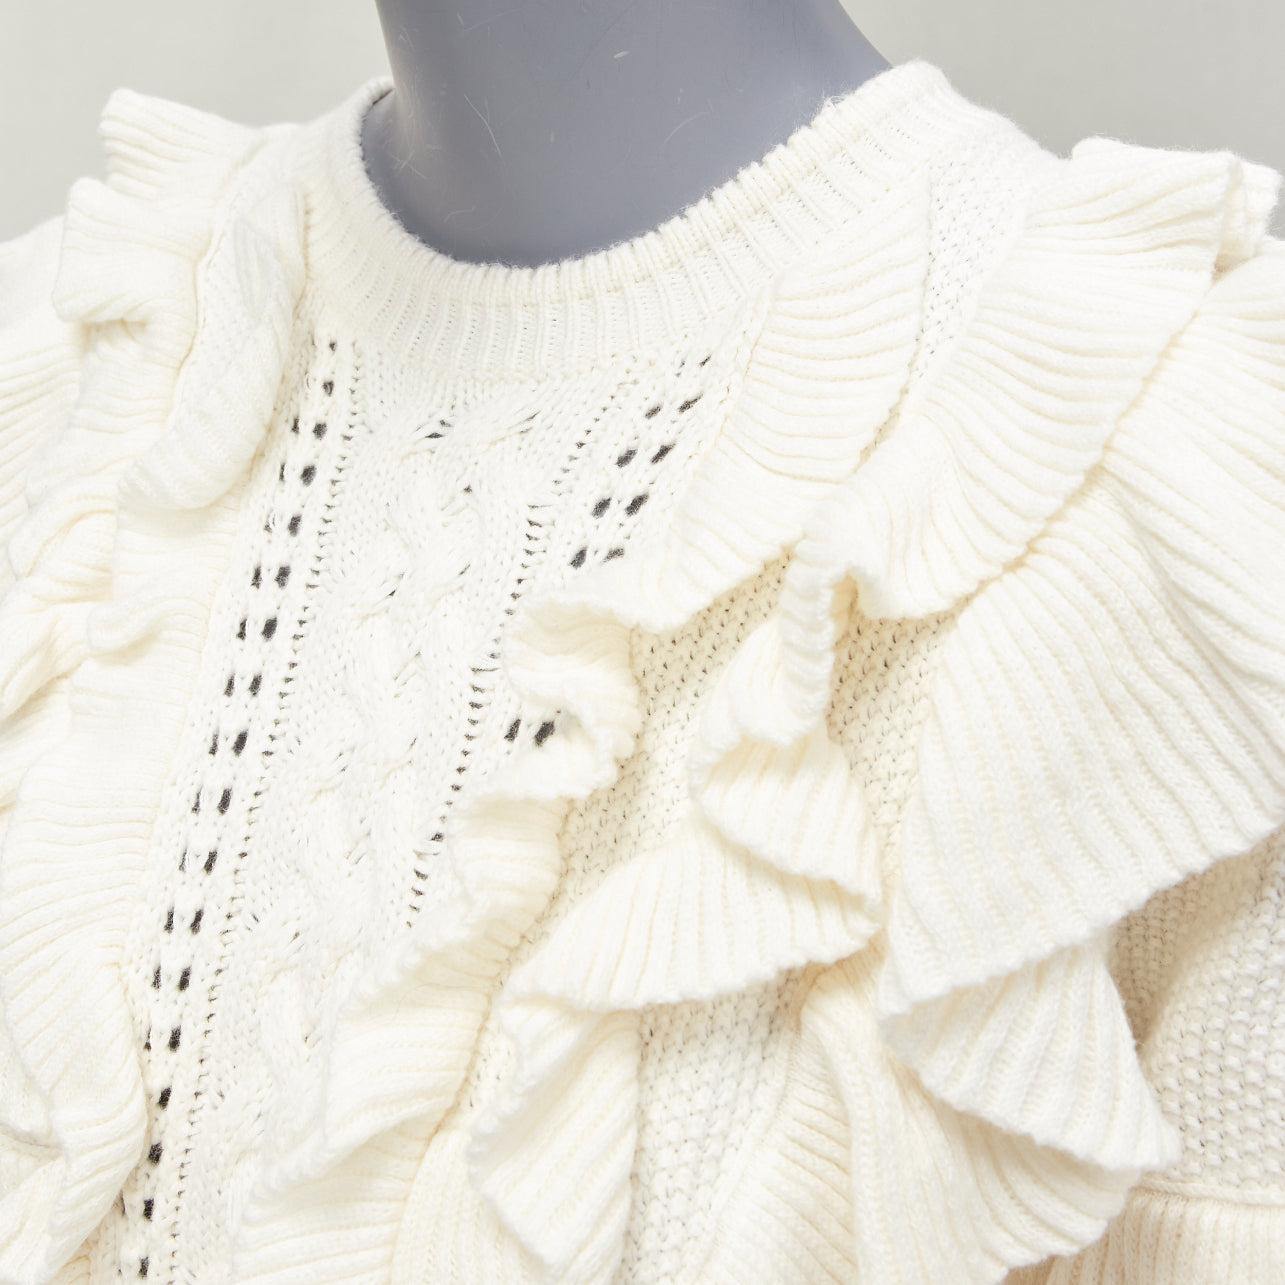 ZIMMERMANN cream cotton creme botanica flounce ruffled cotton sweater US0 XS
Reference: AAWC/A00810
Brand: Zimmermann
Model: Botanica
Material: Cotton, Cashmere
Color: Cream
Pattern: Solid
Closure: Pullover
Extra Details: Even Zimmermann's knitwear